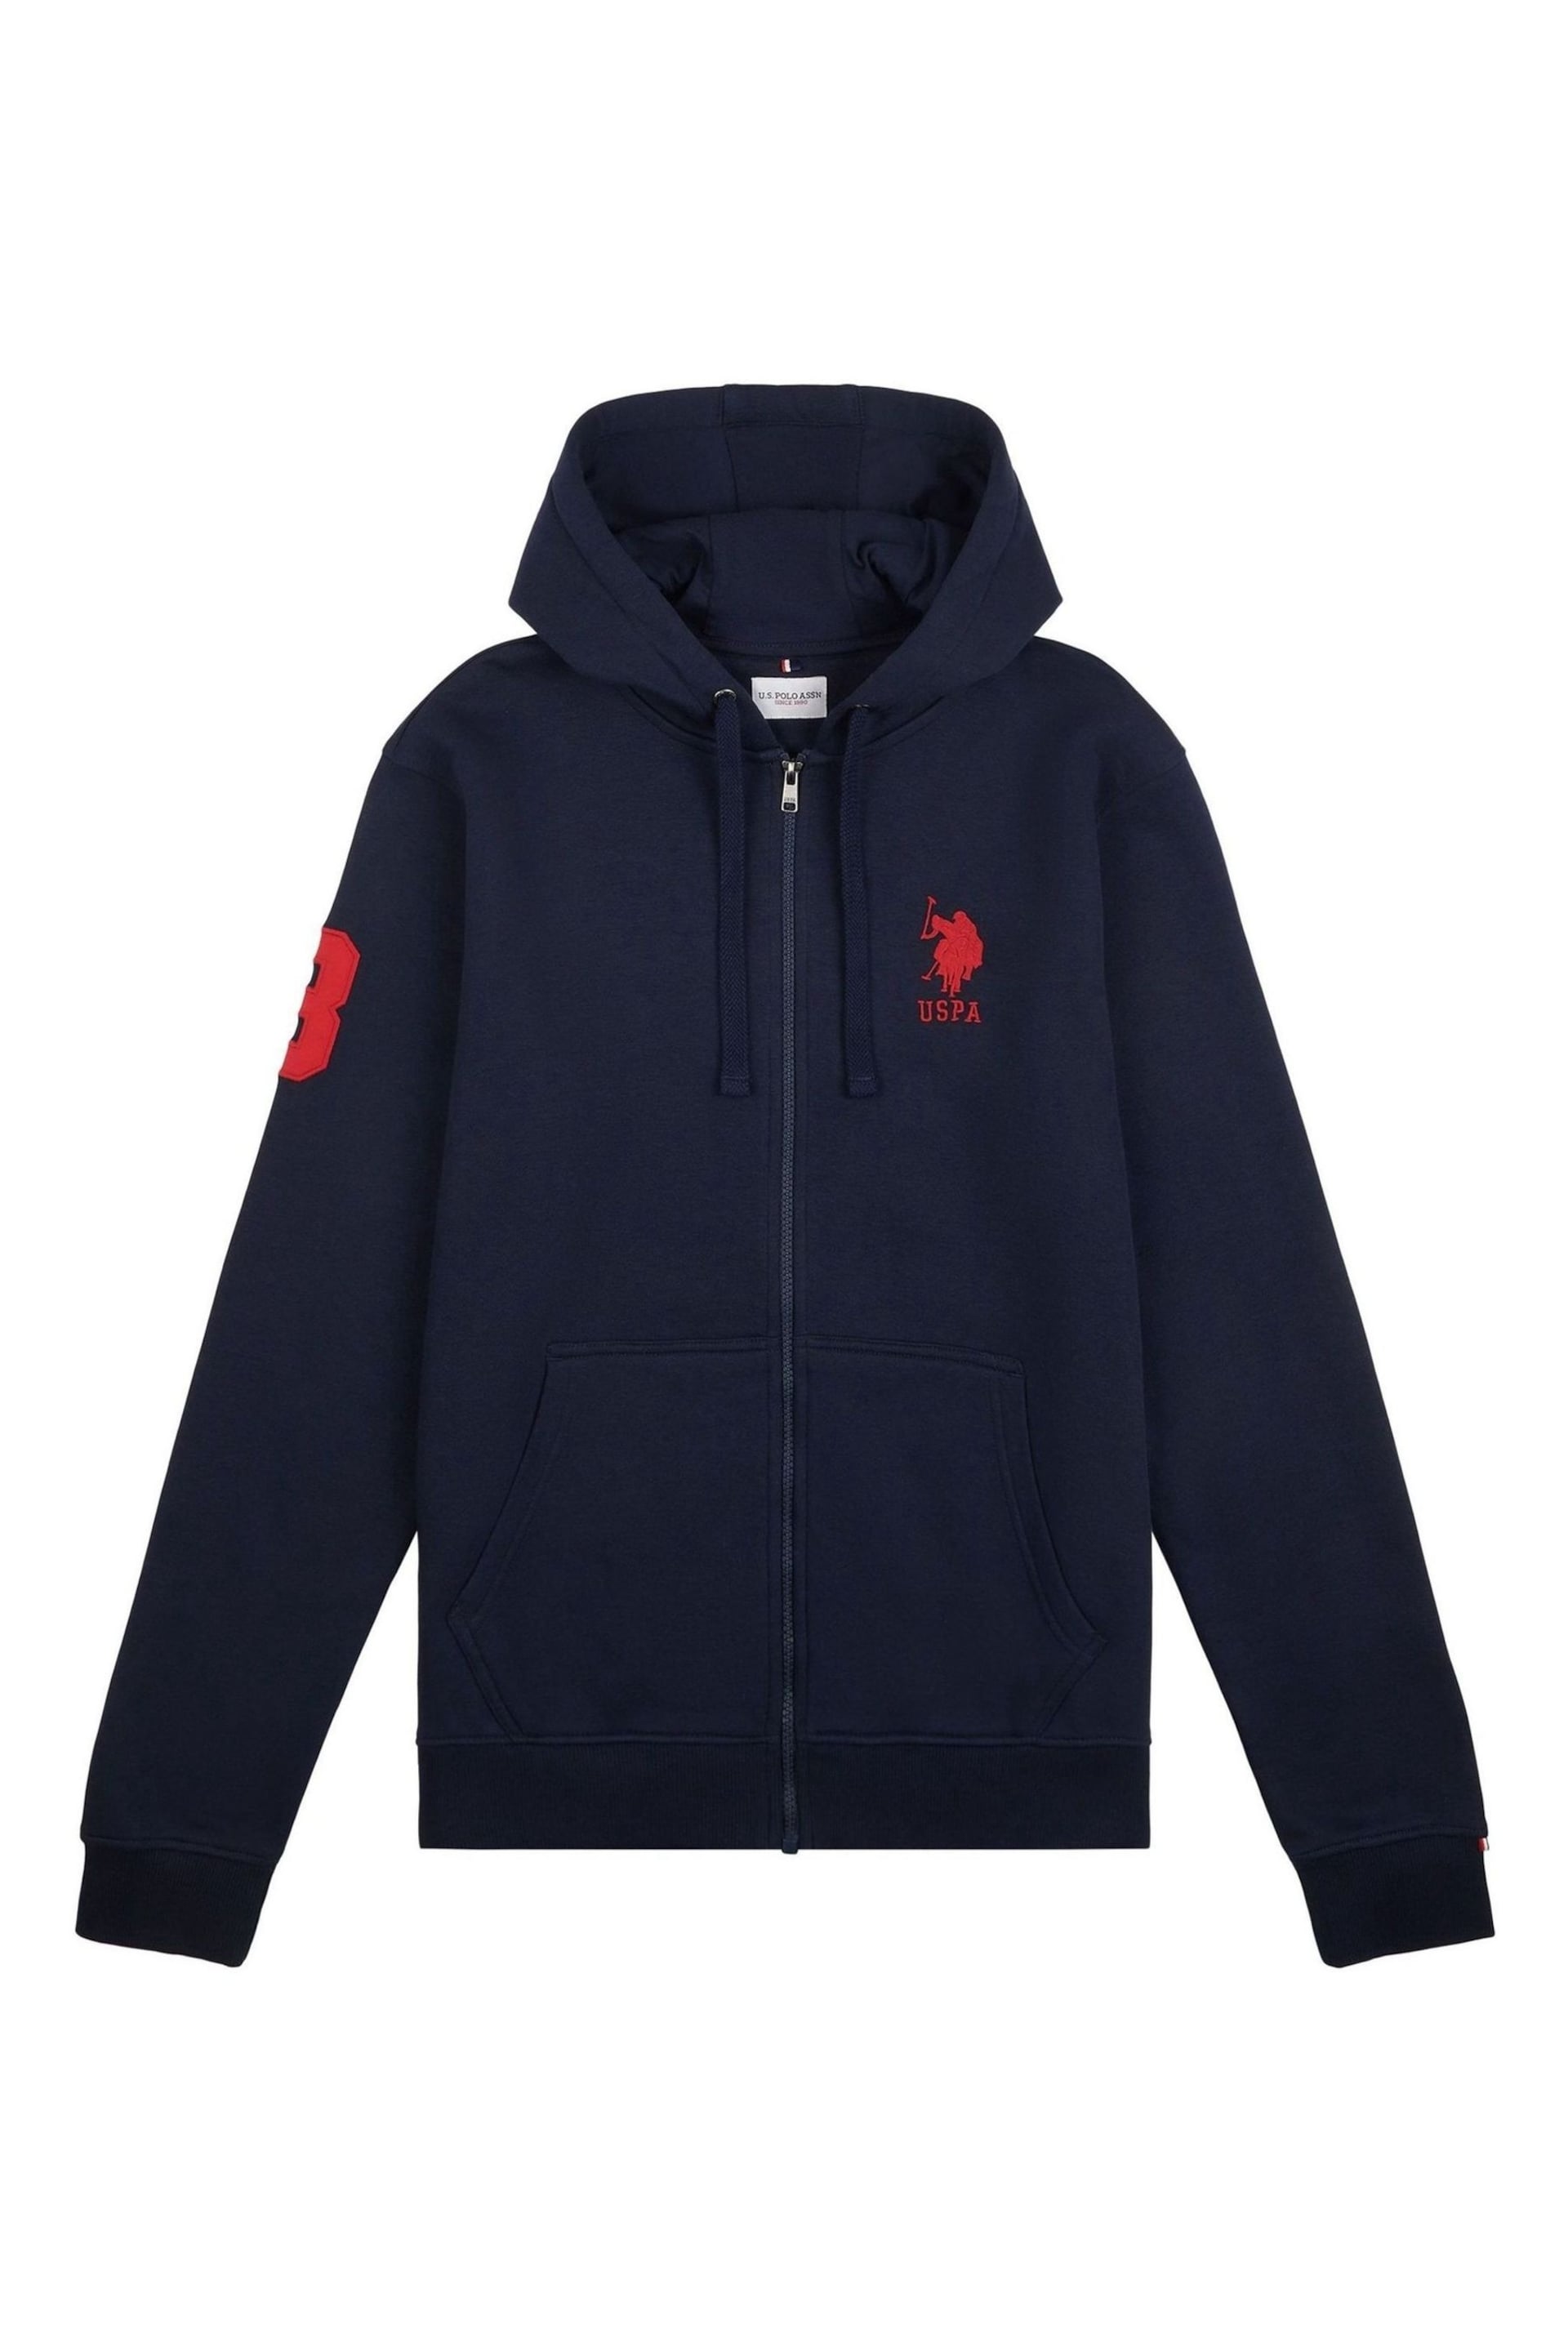 U.S. Polo Assn. Mens Classic Fit Player 3 Zip Hoodie - Image 6 of 9